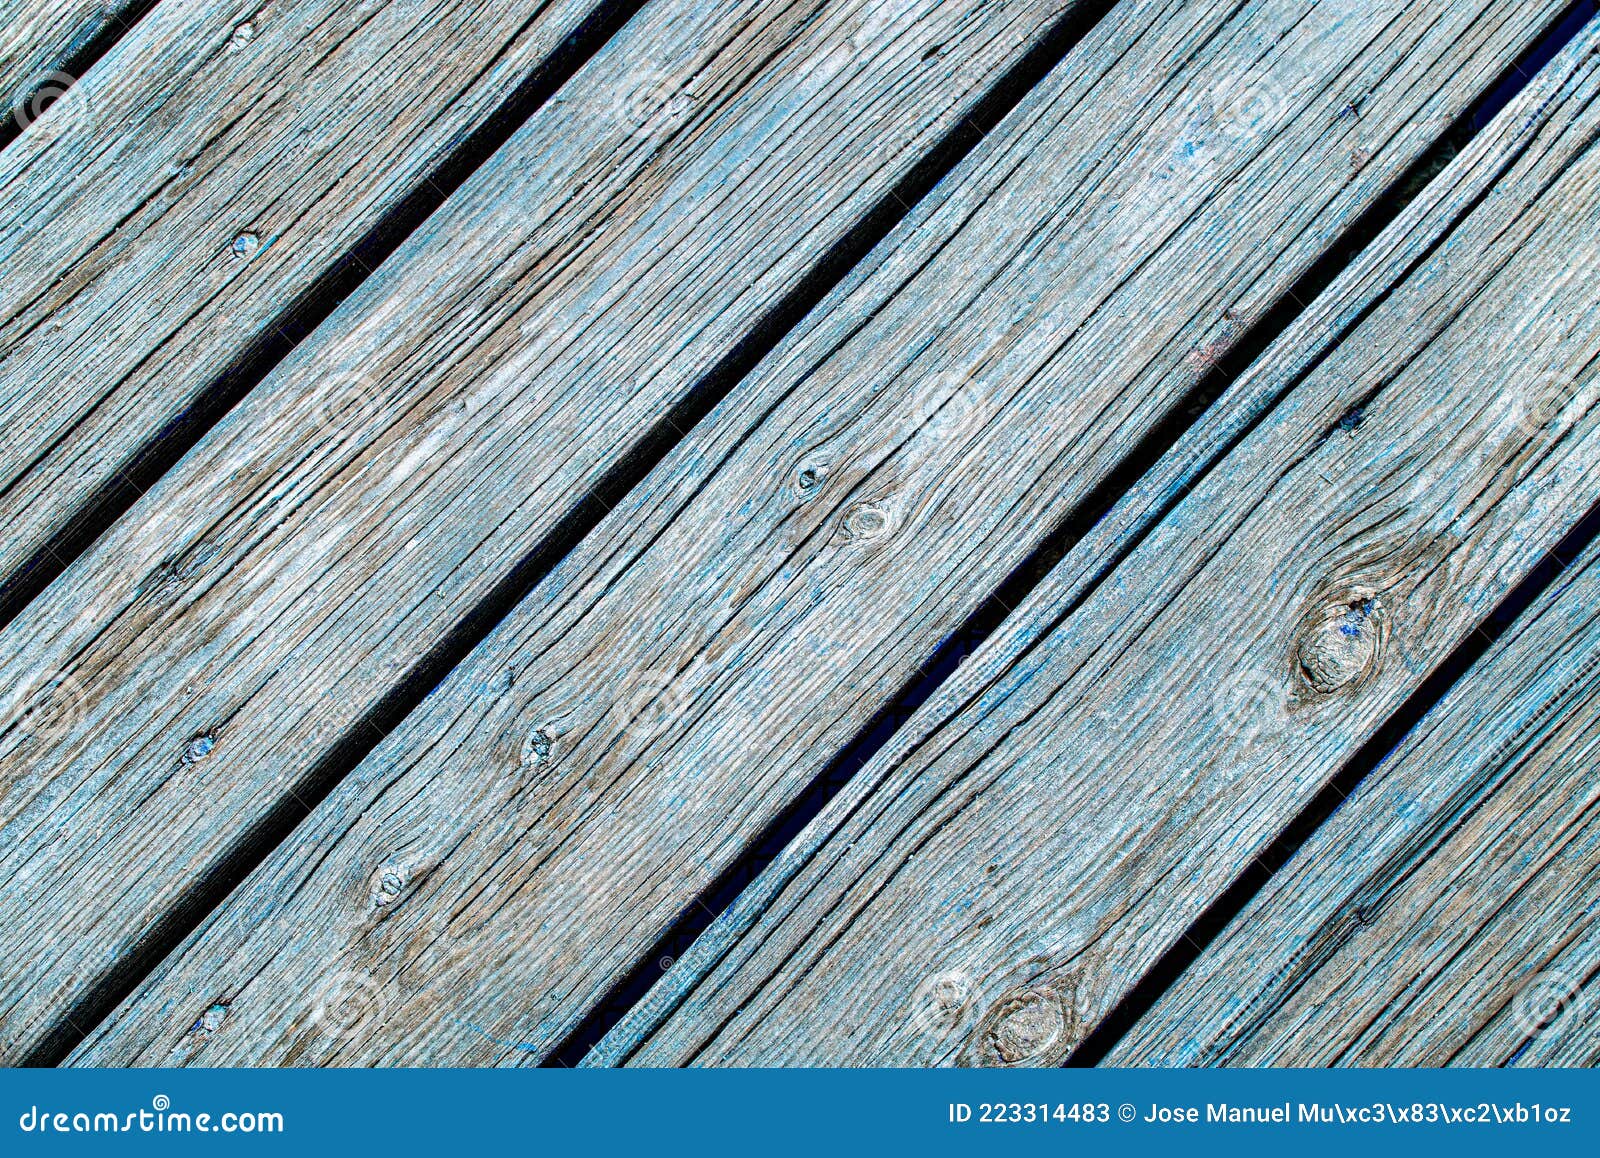 background of wooden texture of planks, worn and aged diagonal